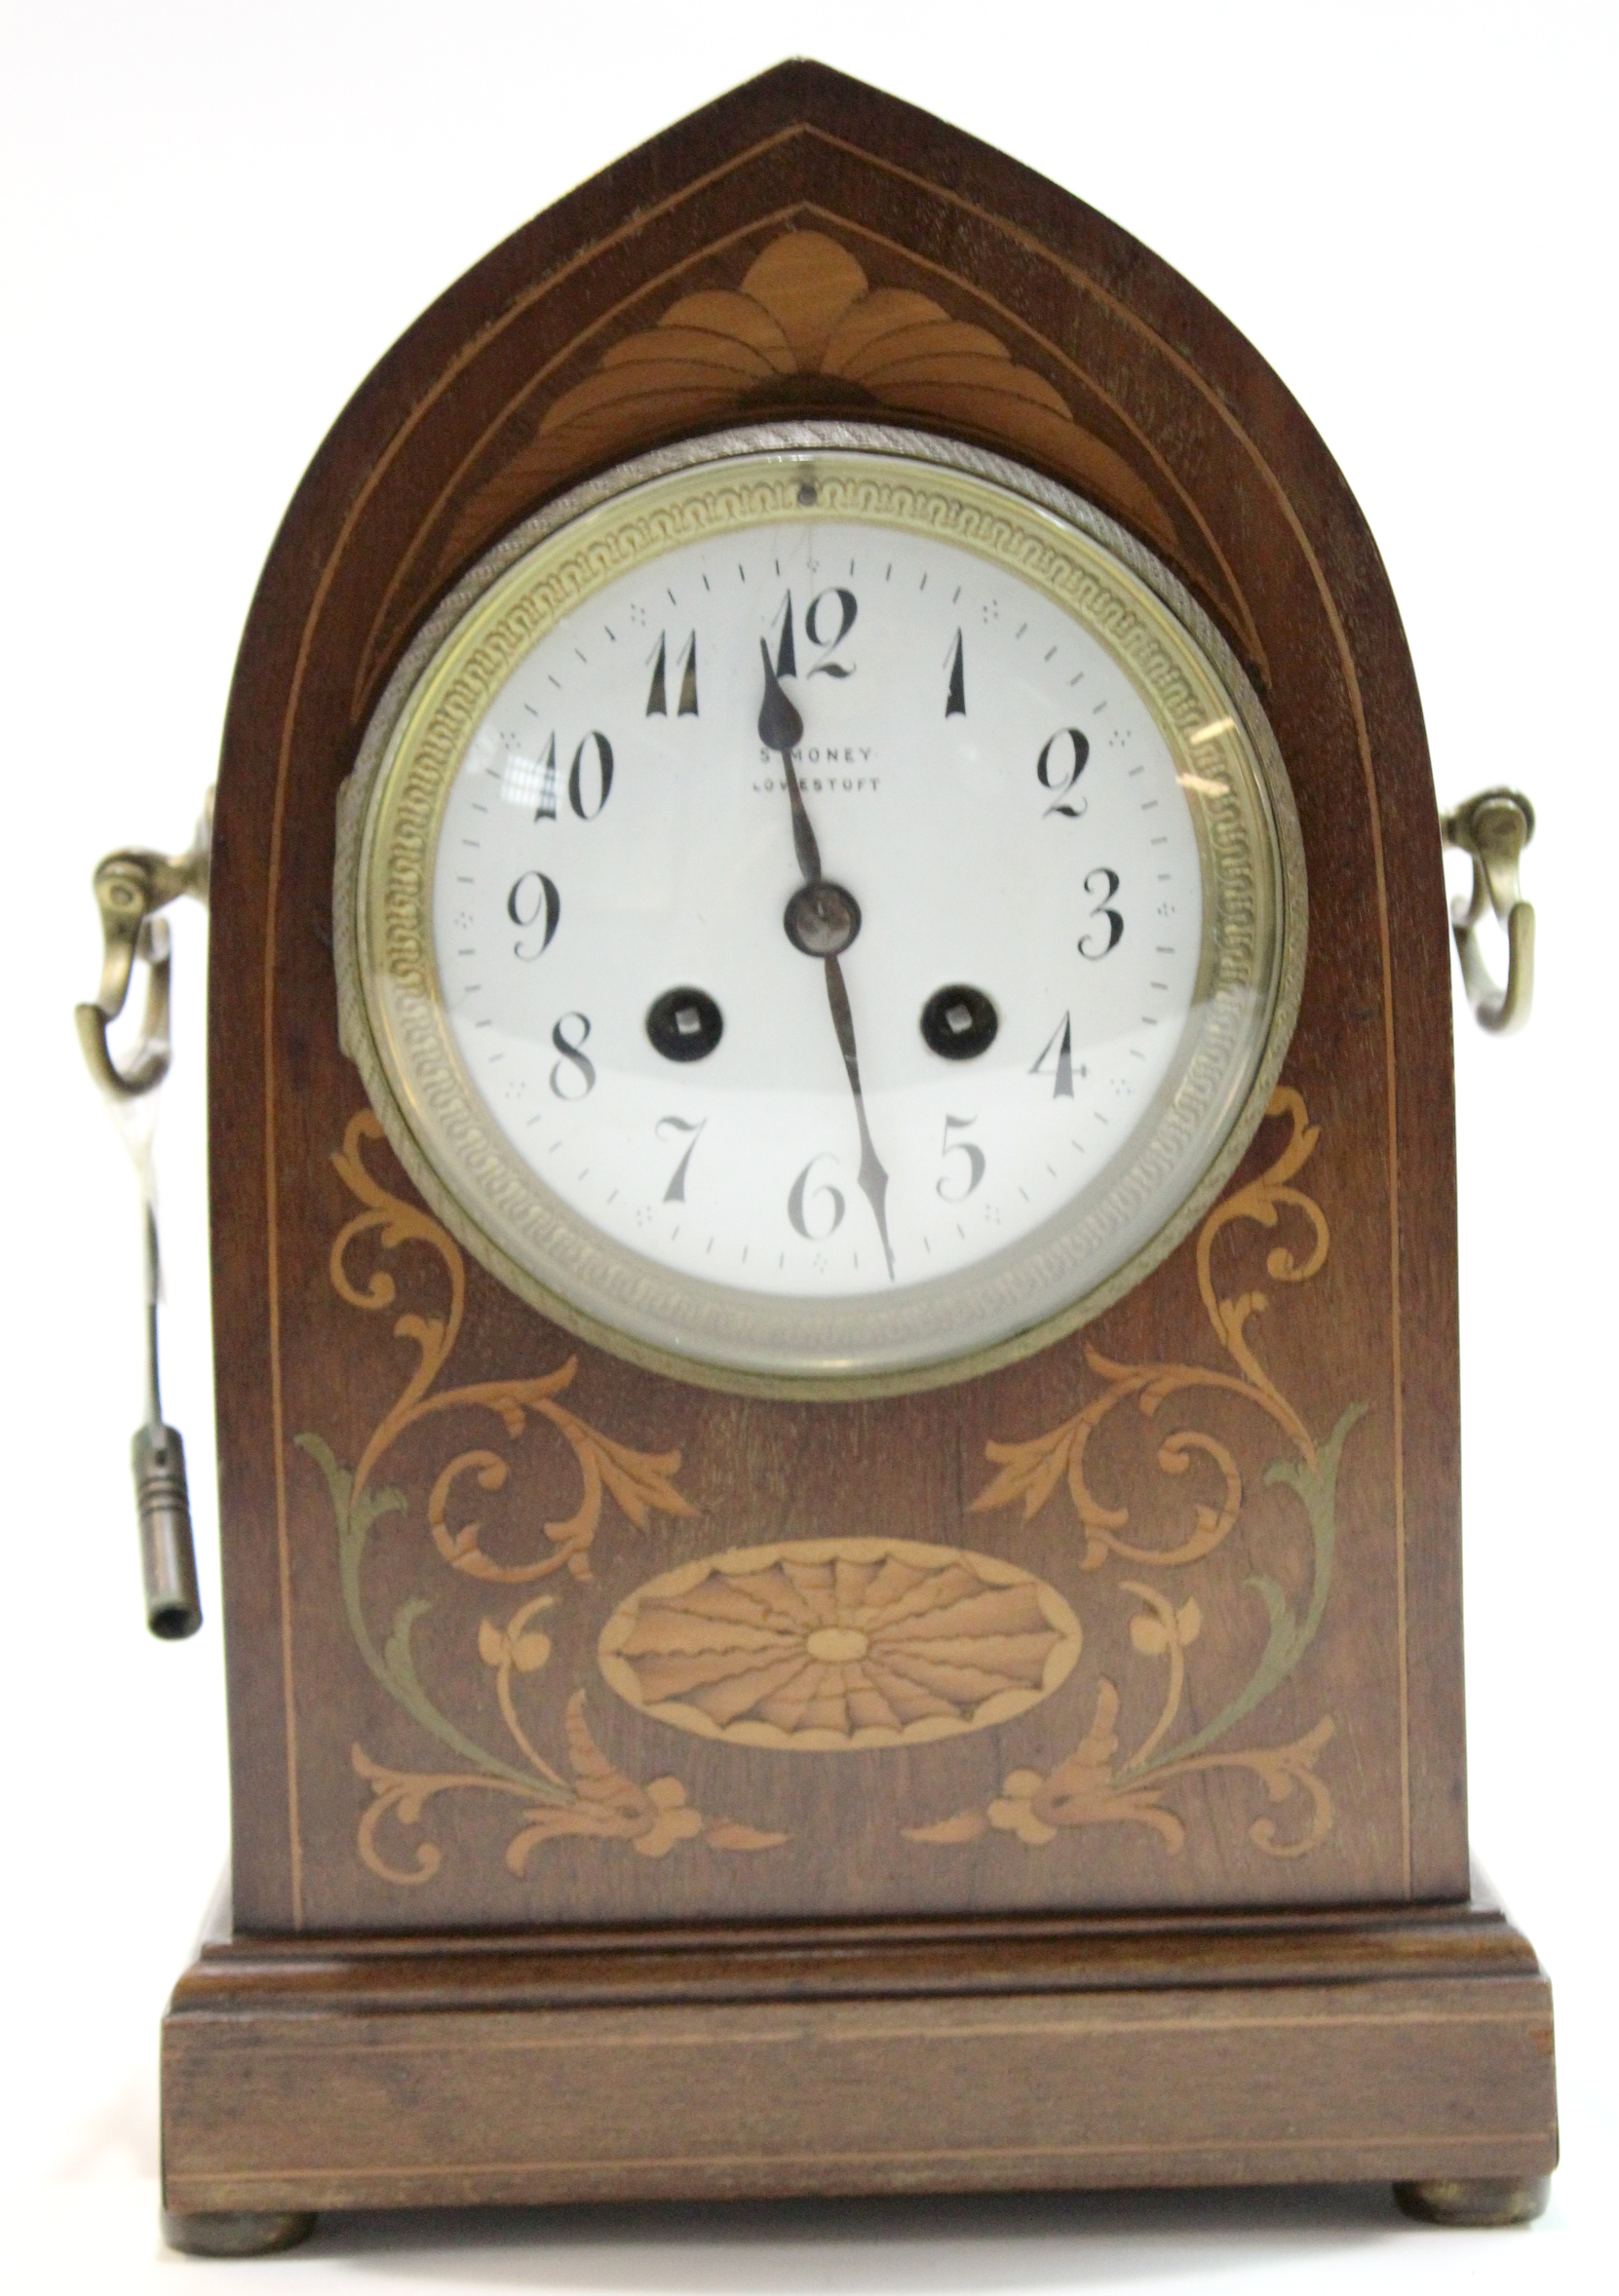 Edwardian bracket clock by S Money of Lowestoft, the clock in lancet style case with brass handles